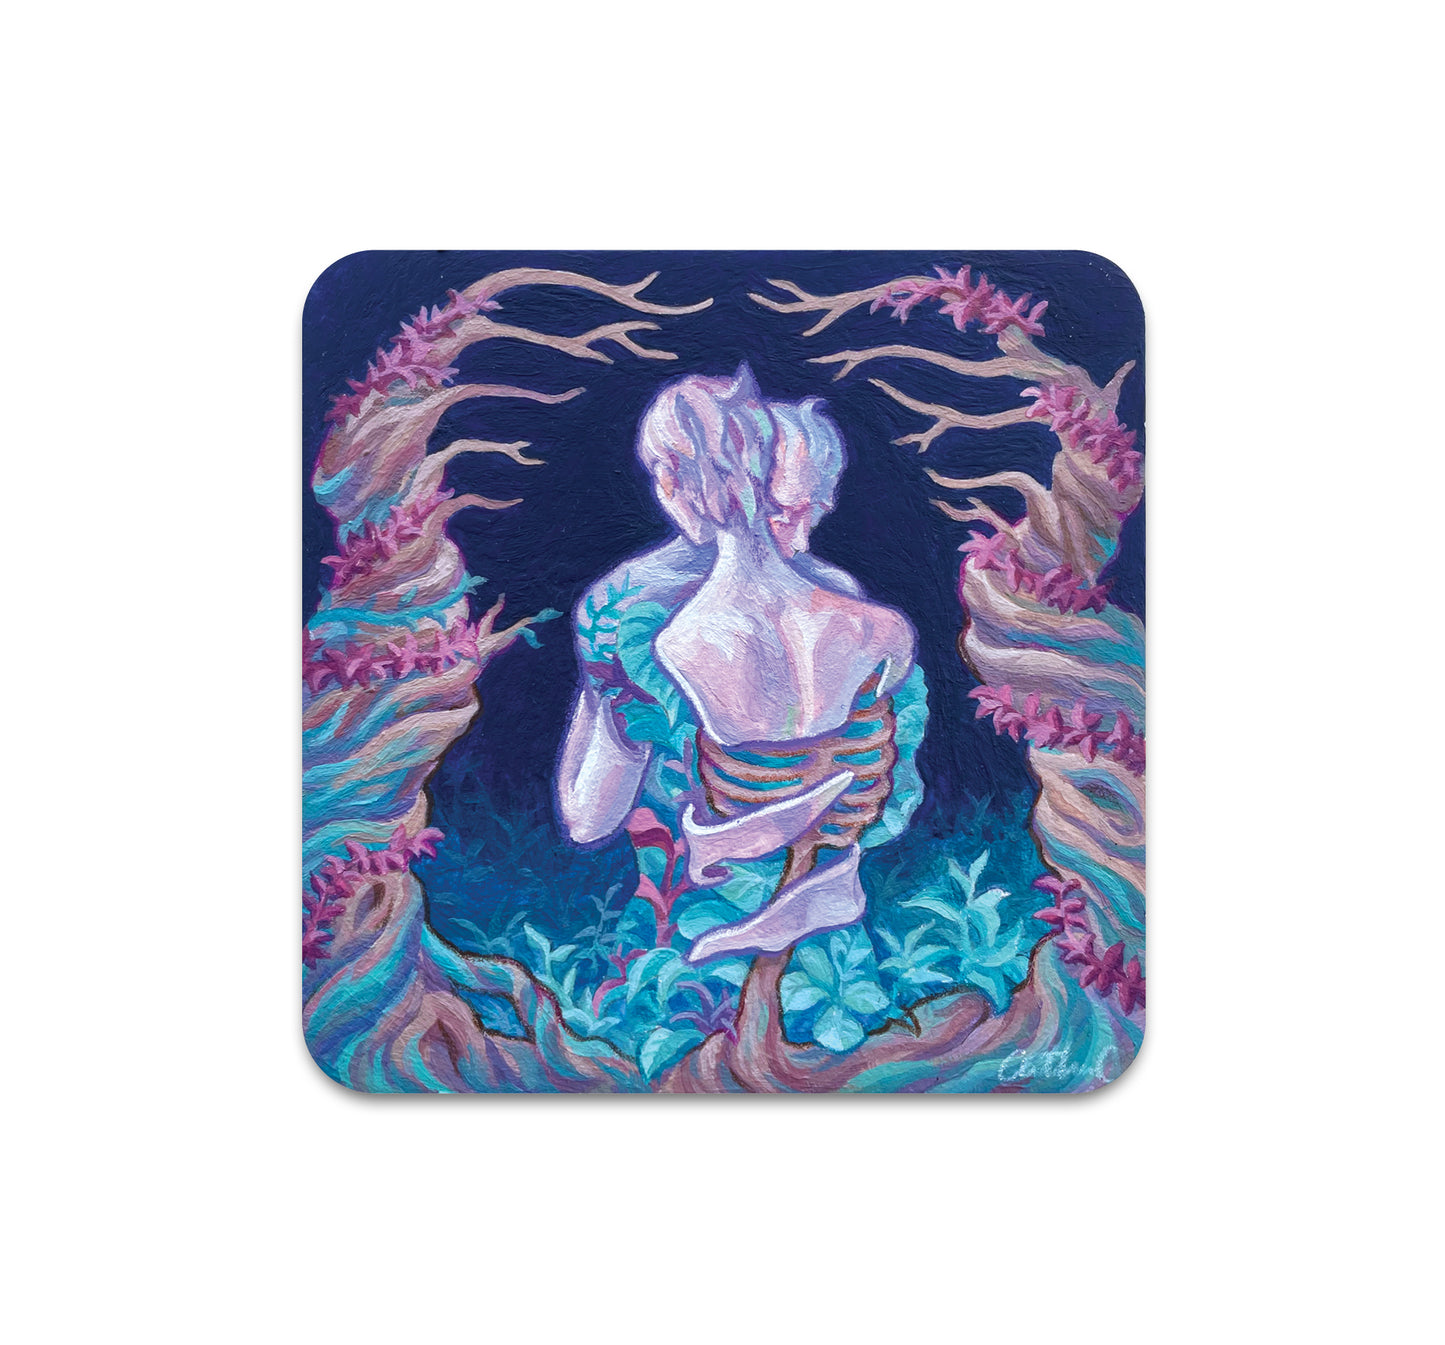 S7 Authan Chen - Coaster 1